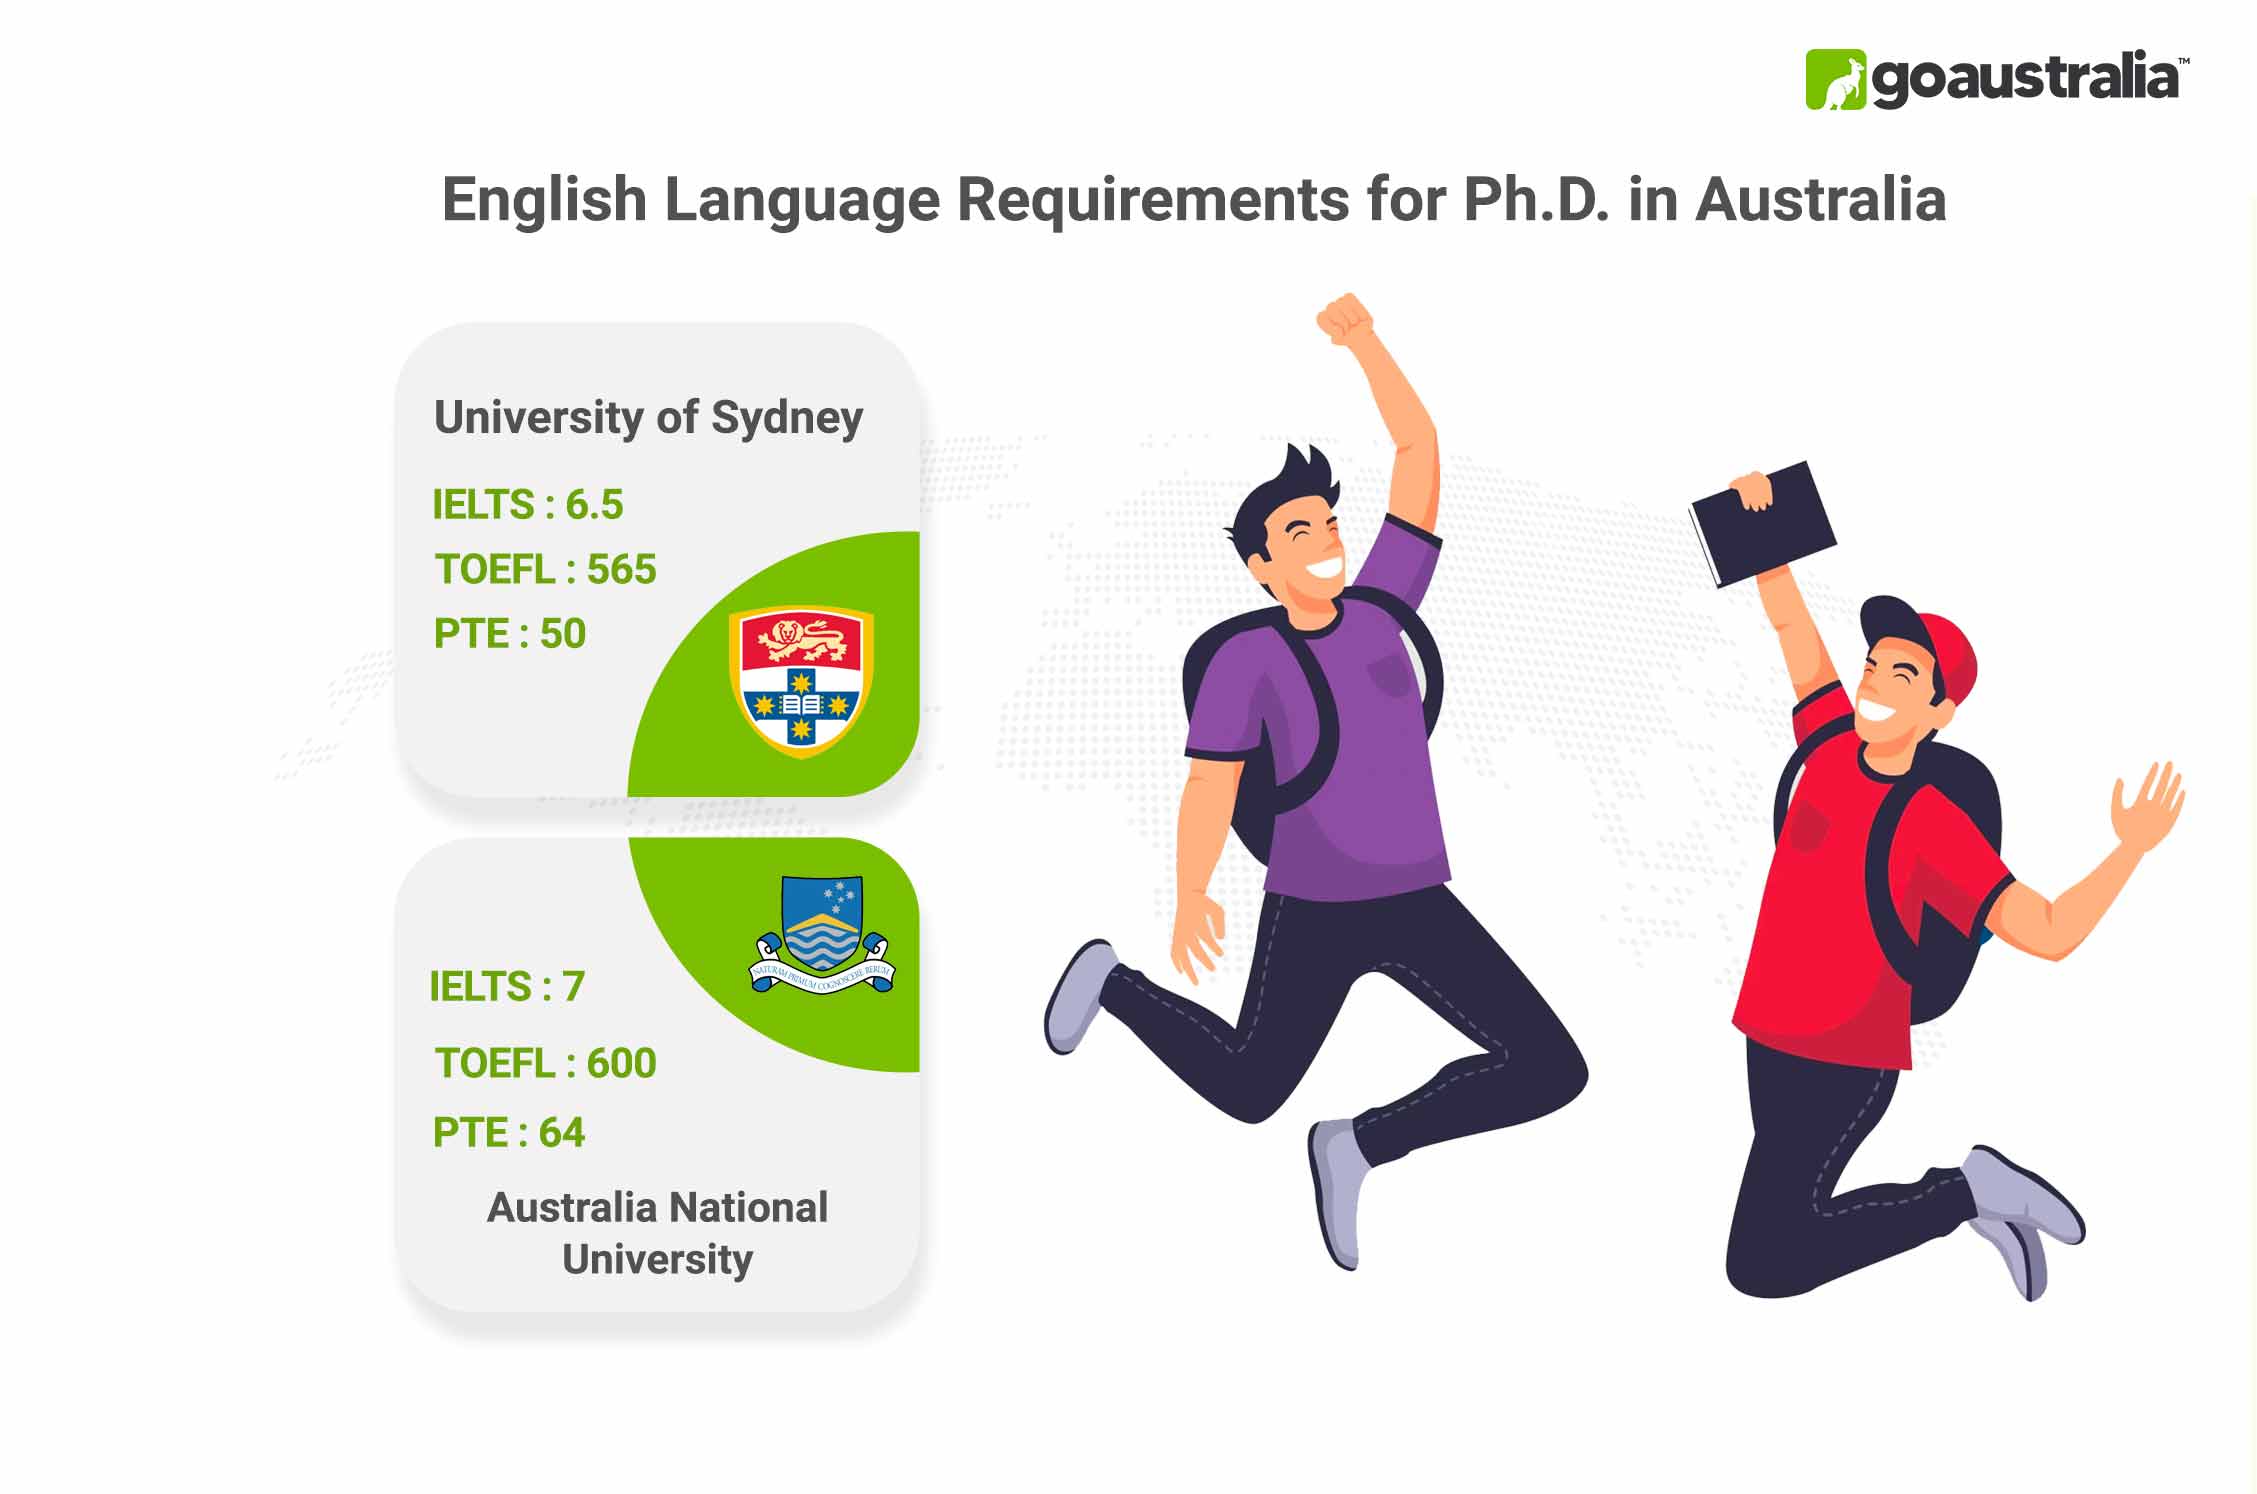 English Language Requirements For Ph.D. In Australia